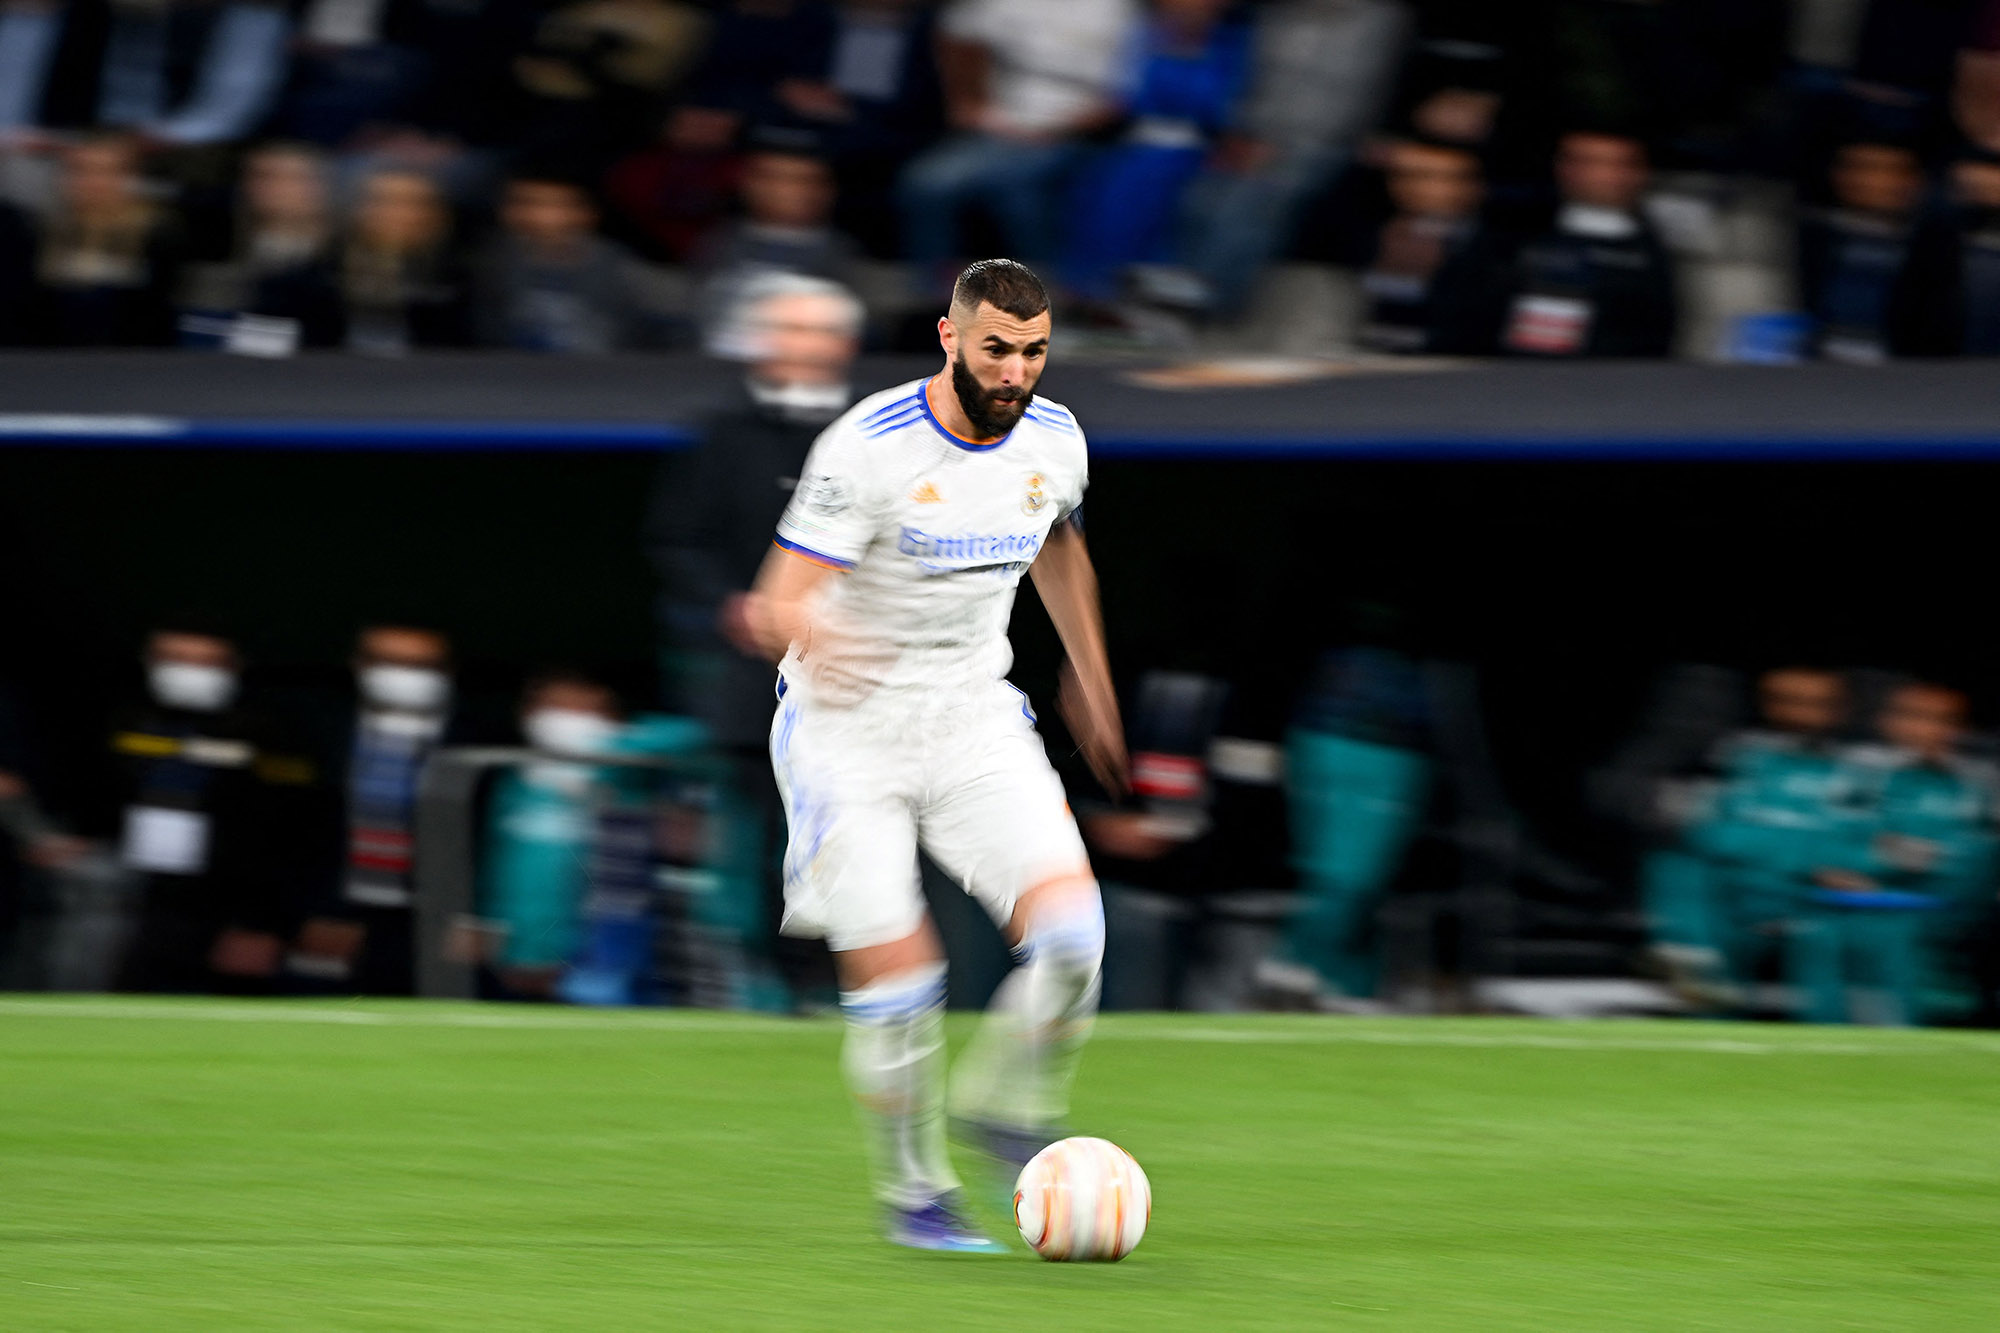 Real Madrid's French forward Karim Benzema runs with the ball during a&nbsp;UEFA Champions League match